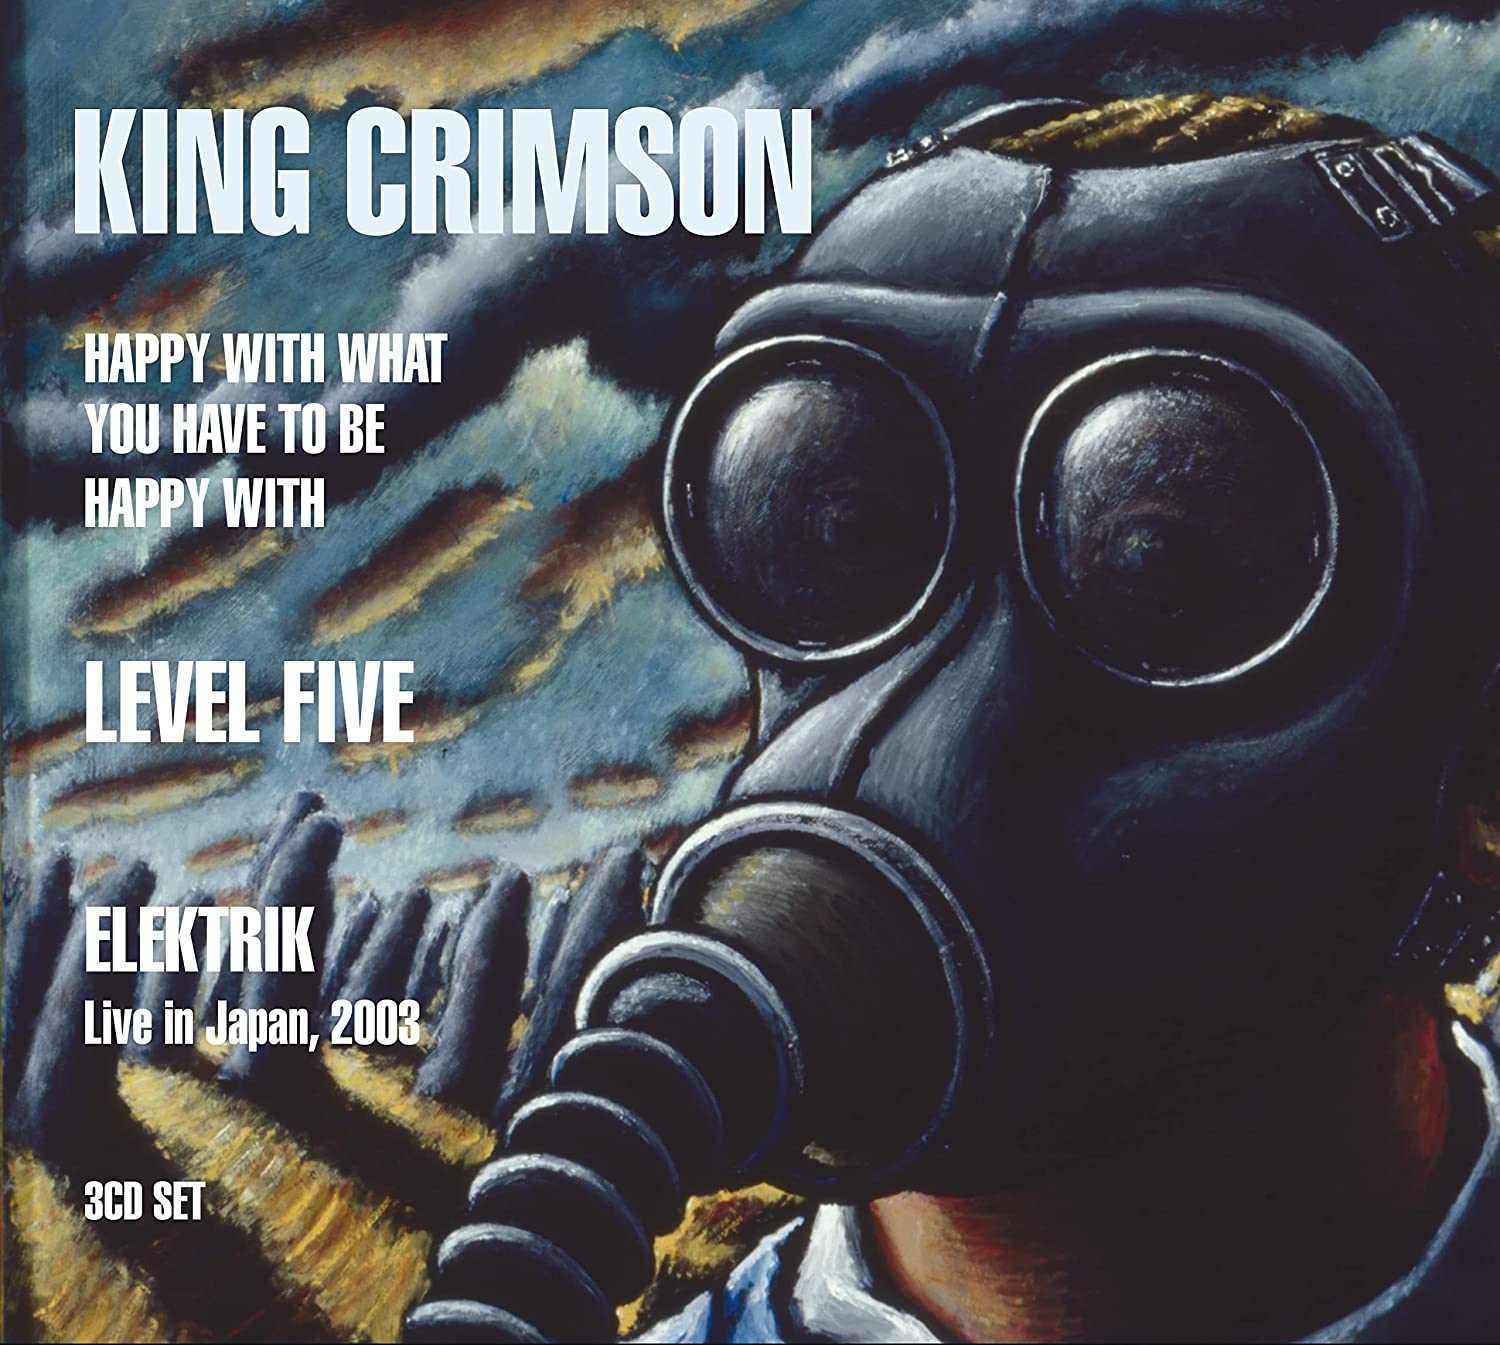 KING CRIMSON - Happy With What You Have to Be Happy With / Level Five / Elektrik